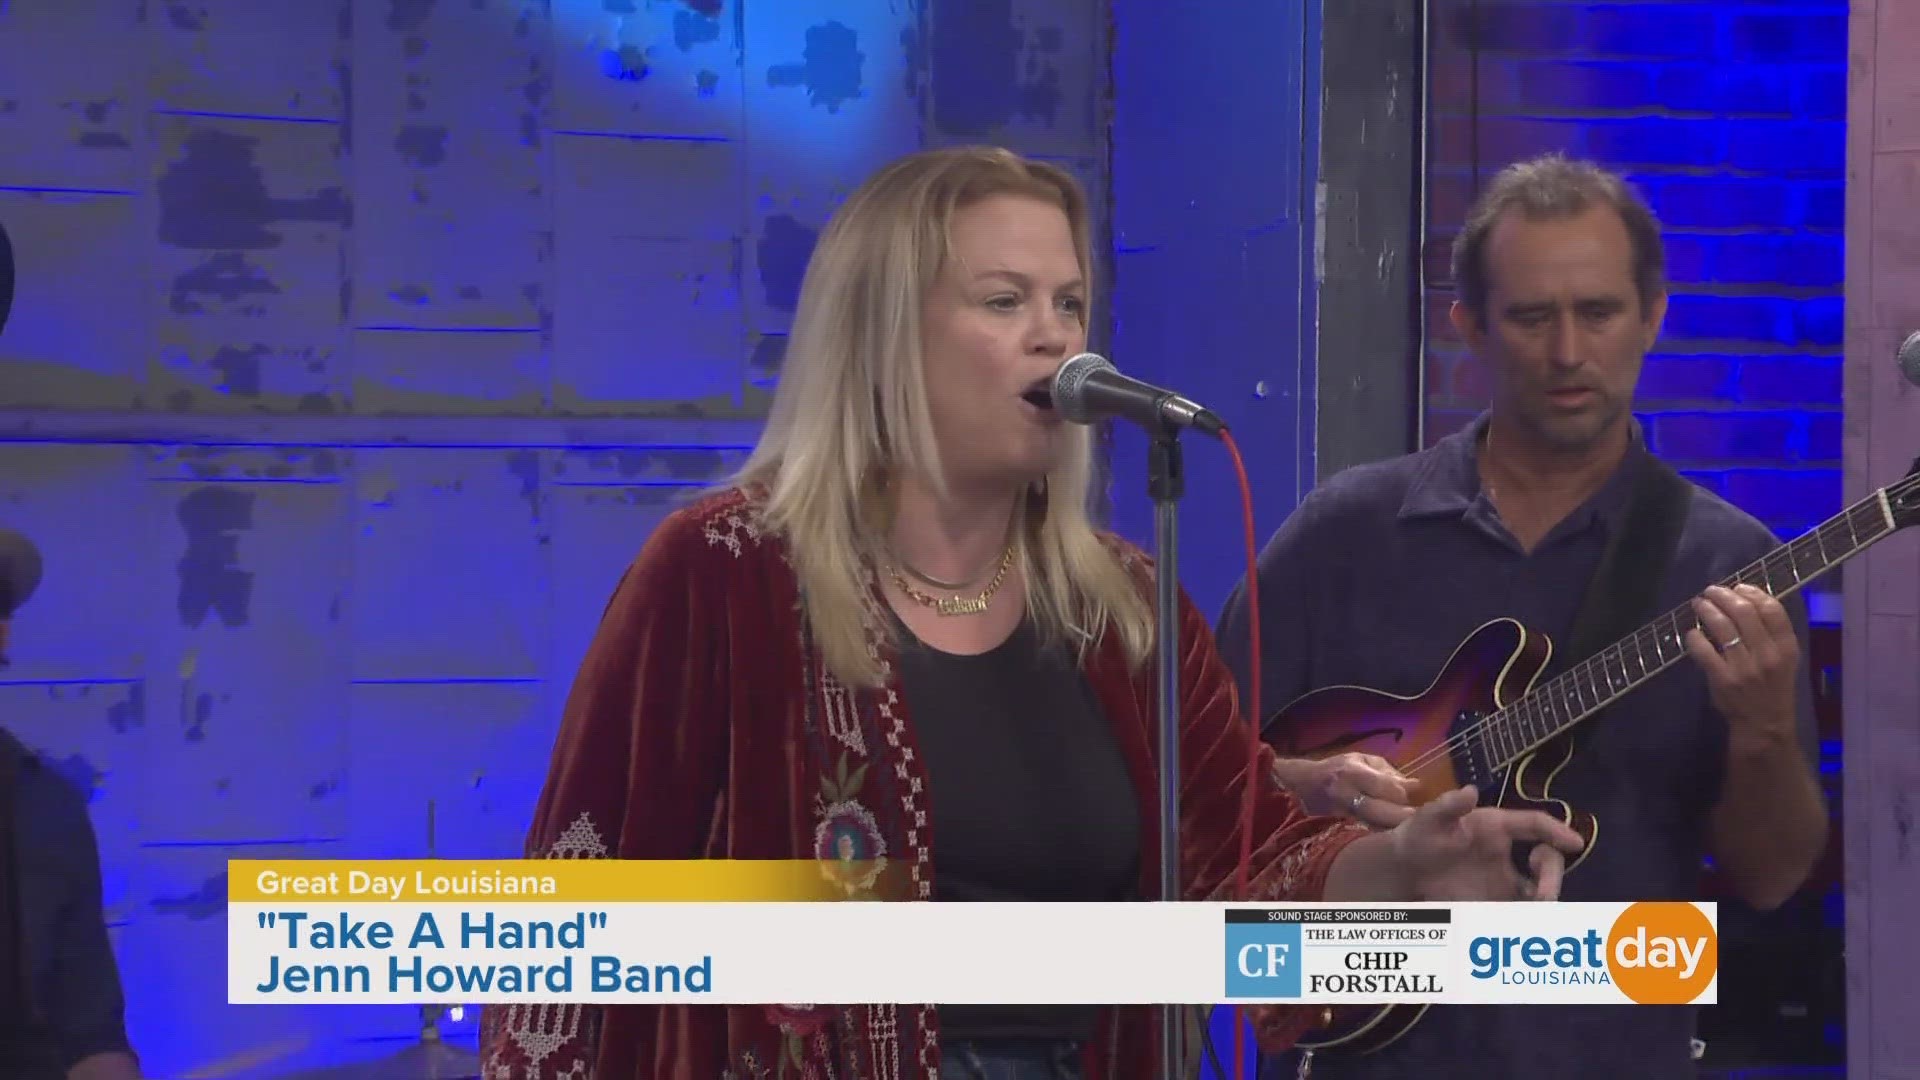 Meet Jenn Howard and her band and enjoy music from their new album.